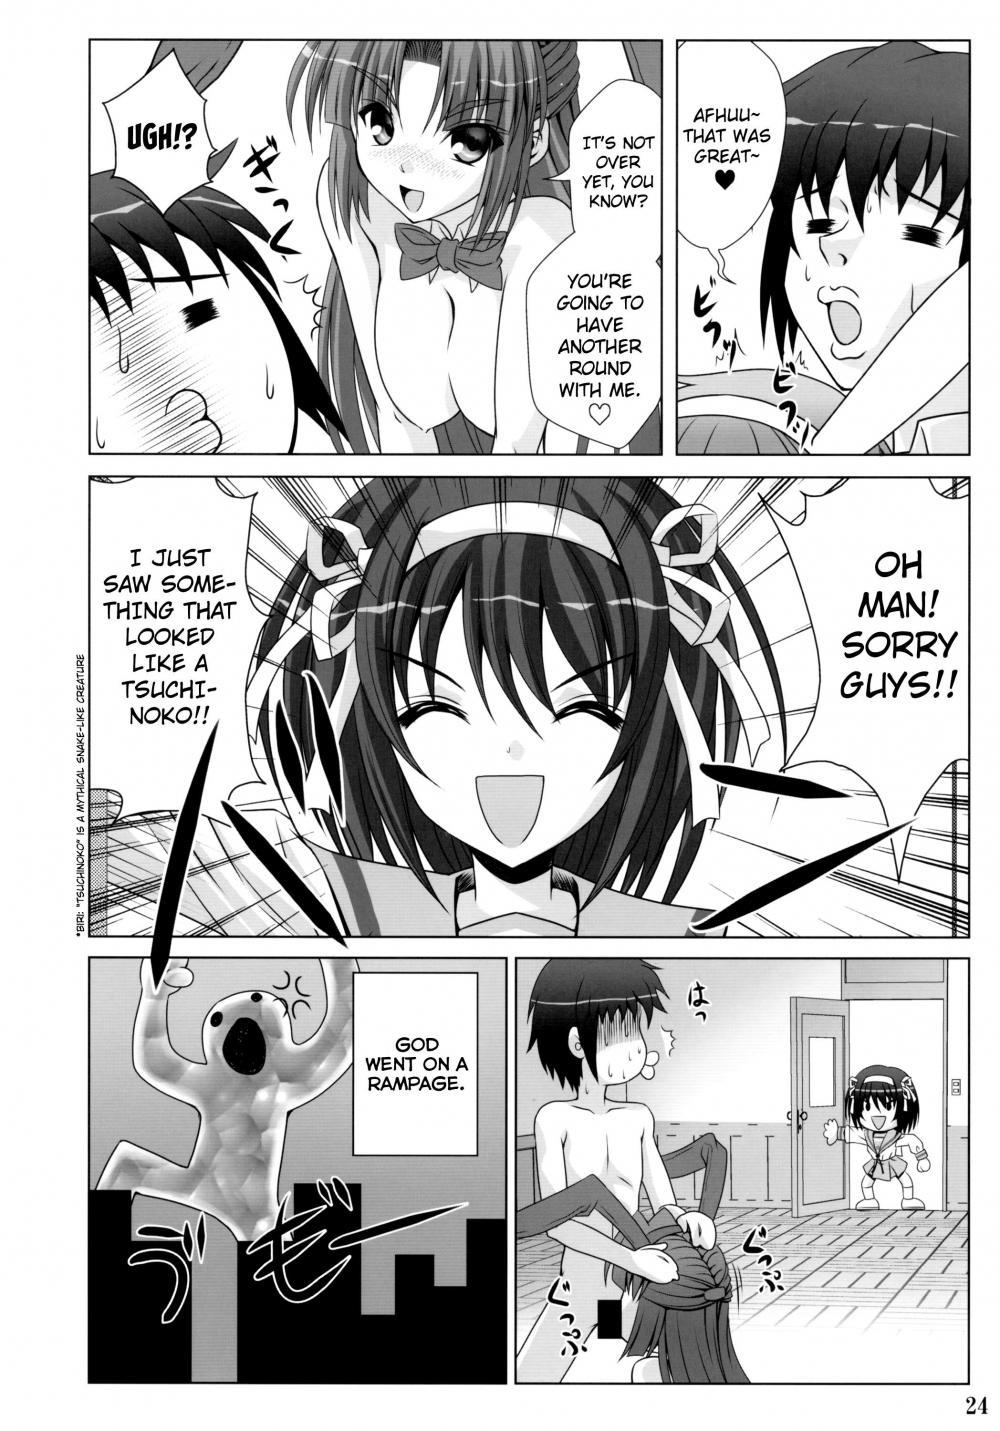 Nopelsex - Bunny Blue-Read-Hentai Manga Hentai Comic - Page: 23 - Online porn video at  mobile